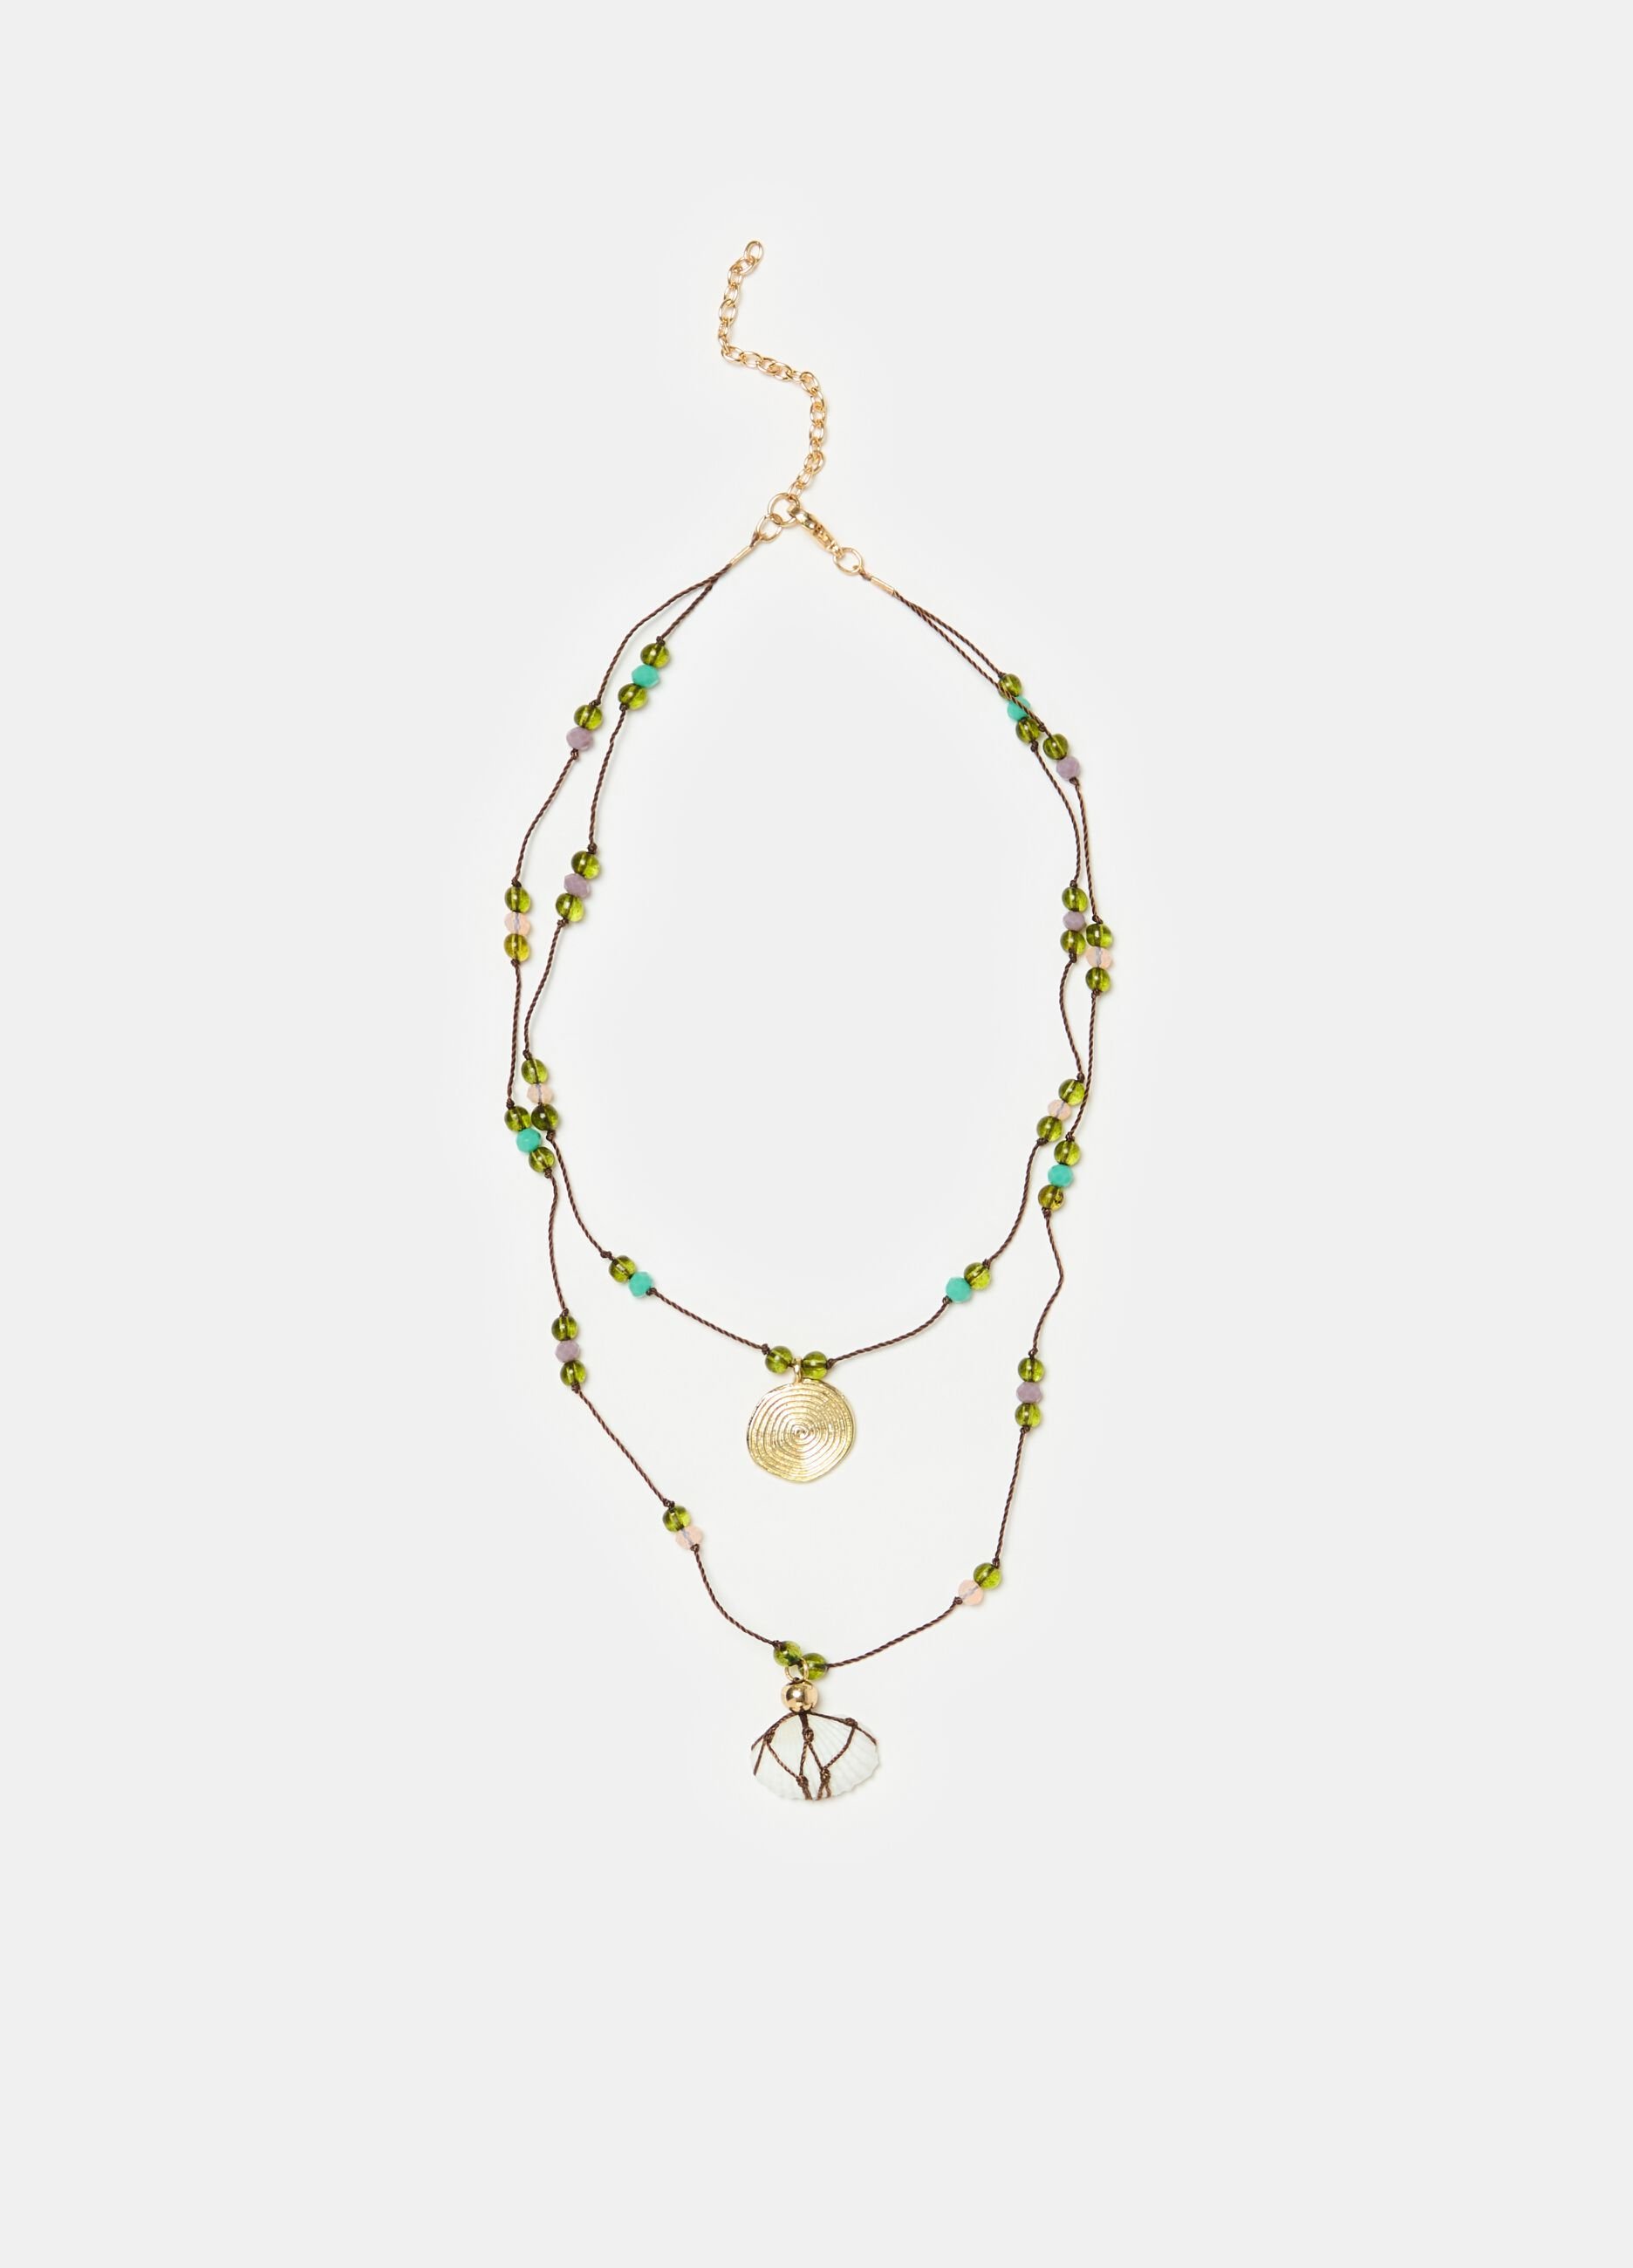 Thin multi-string necklace with pendants